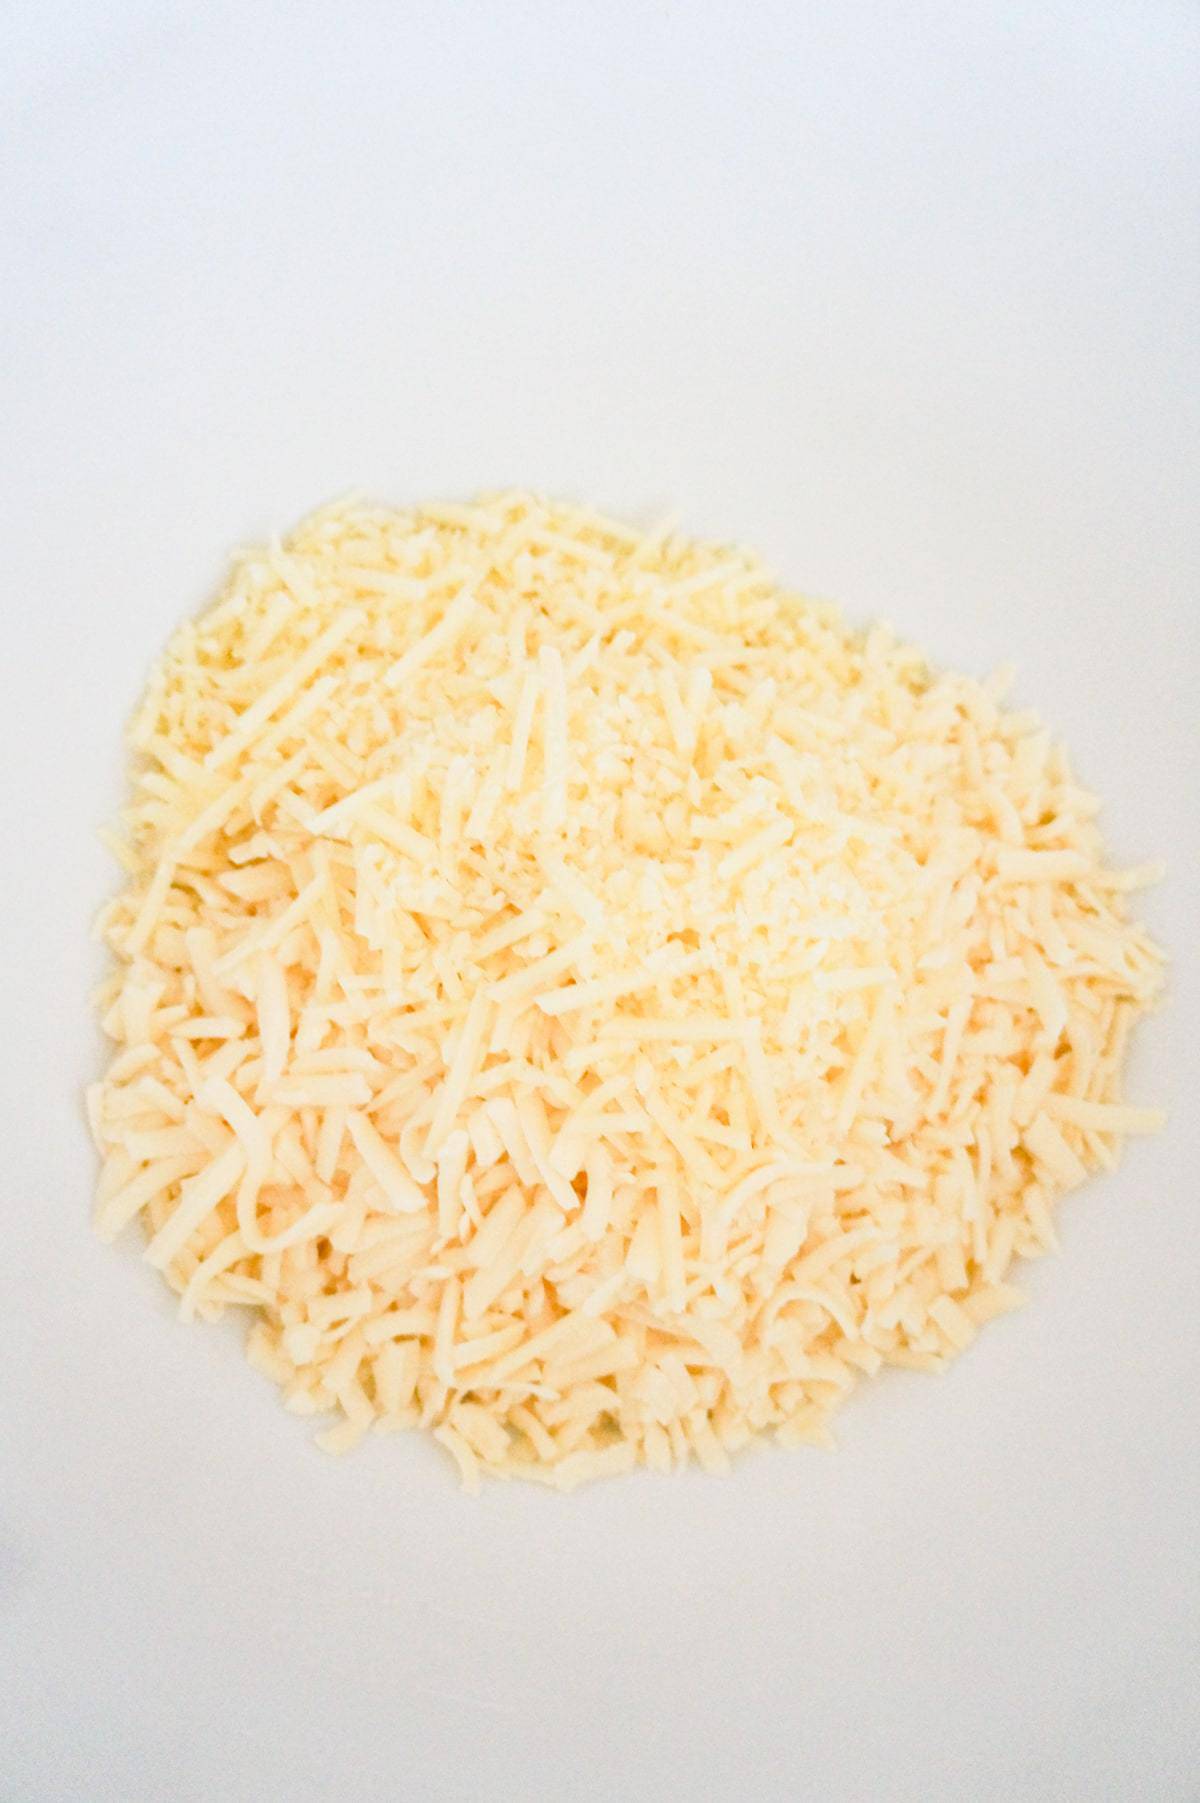 shredded mozzarella and shredded Parmesan in a mixing bowl